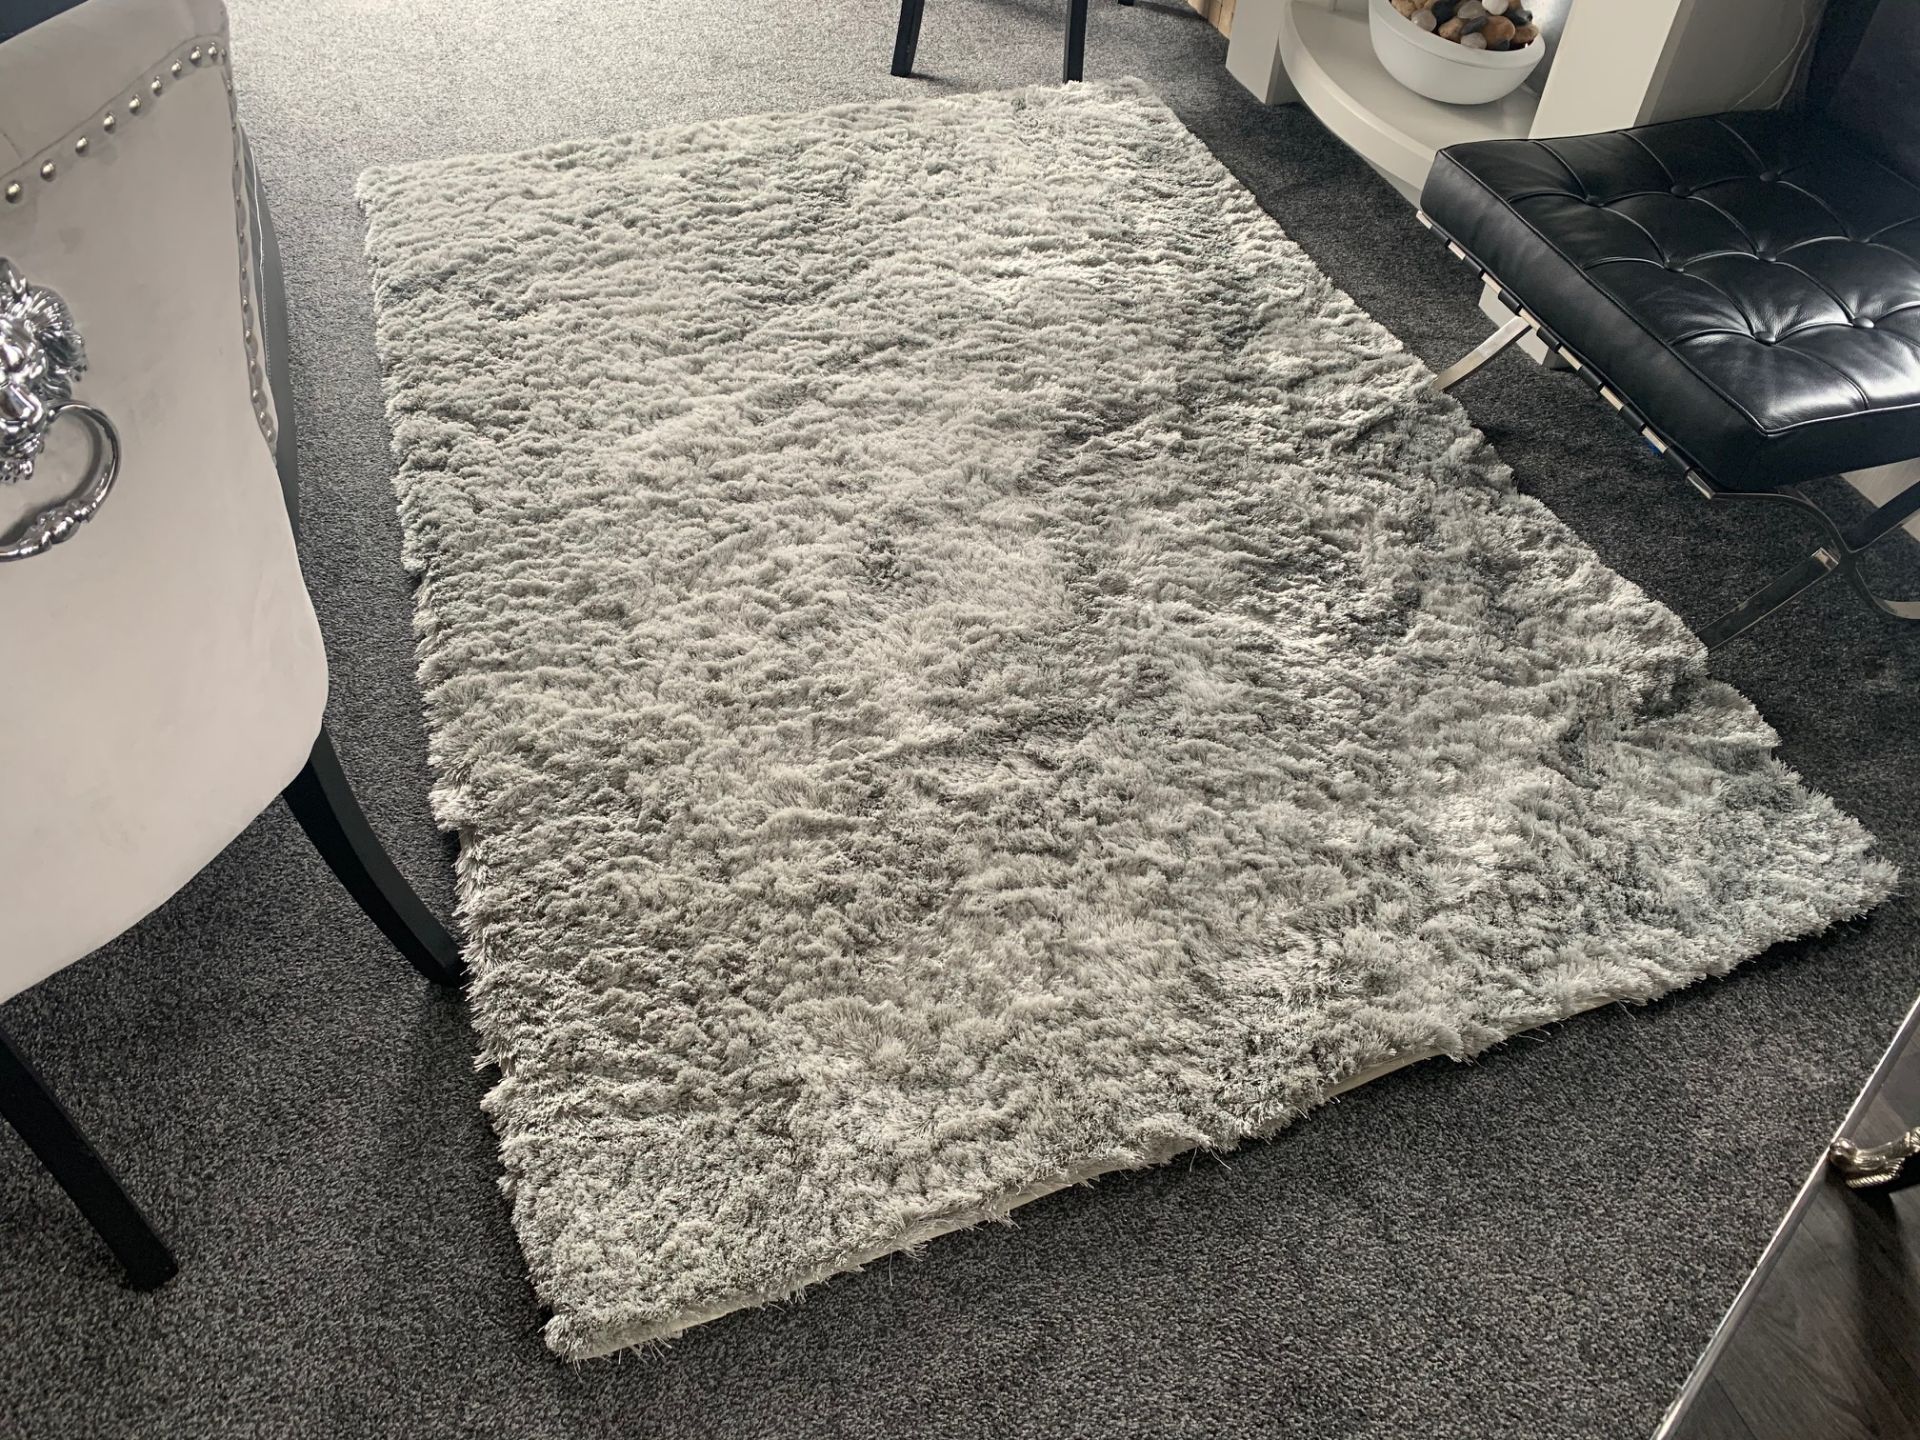 PACKAGED NEW LARGE SILVER CRUSH PILE RUG